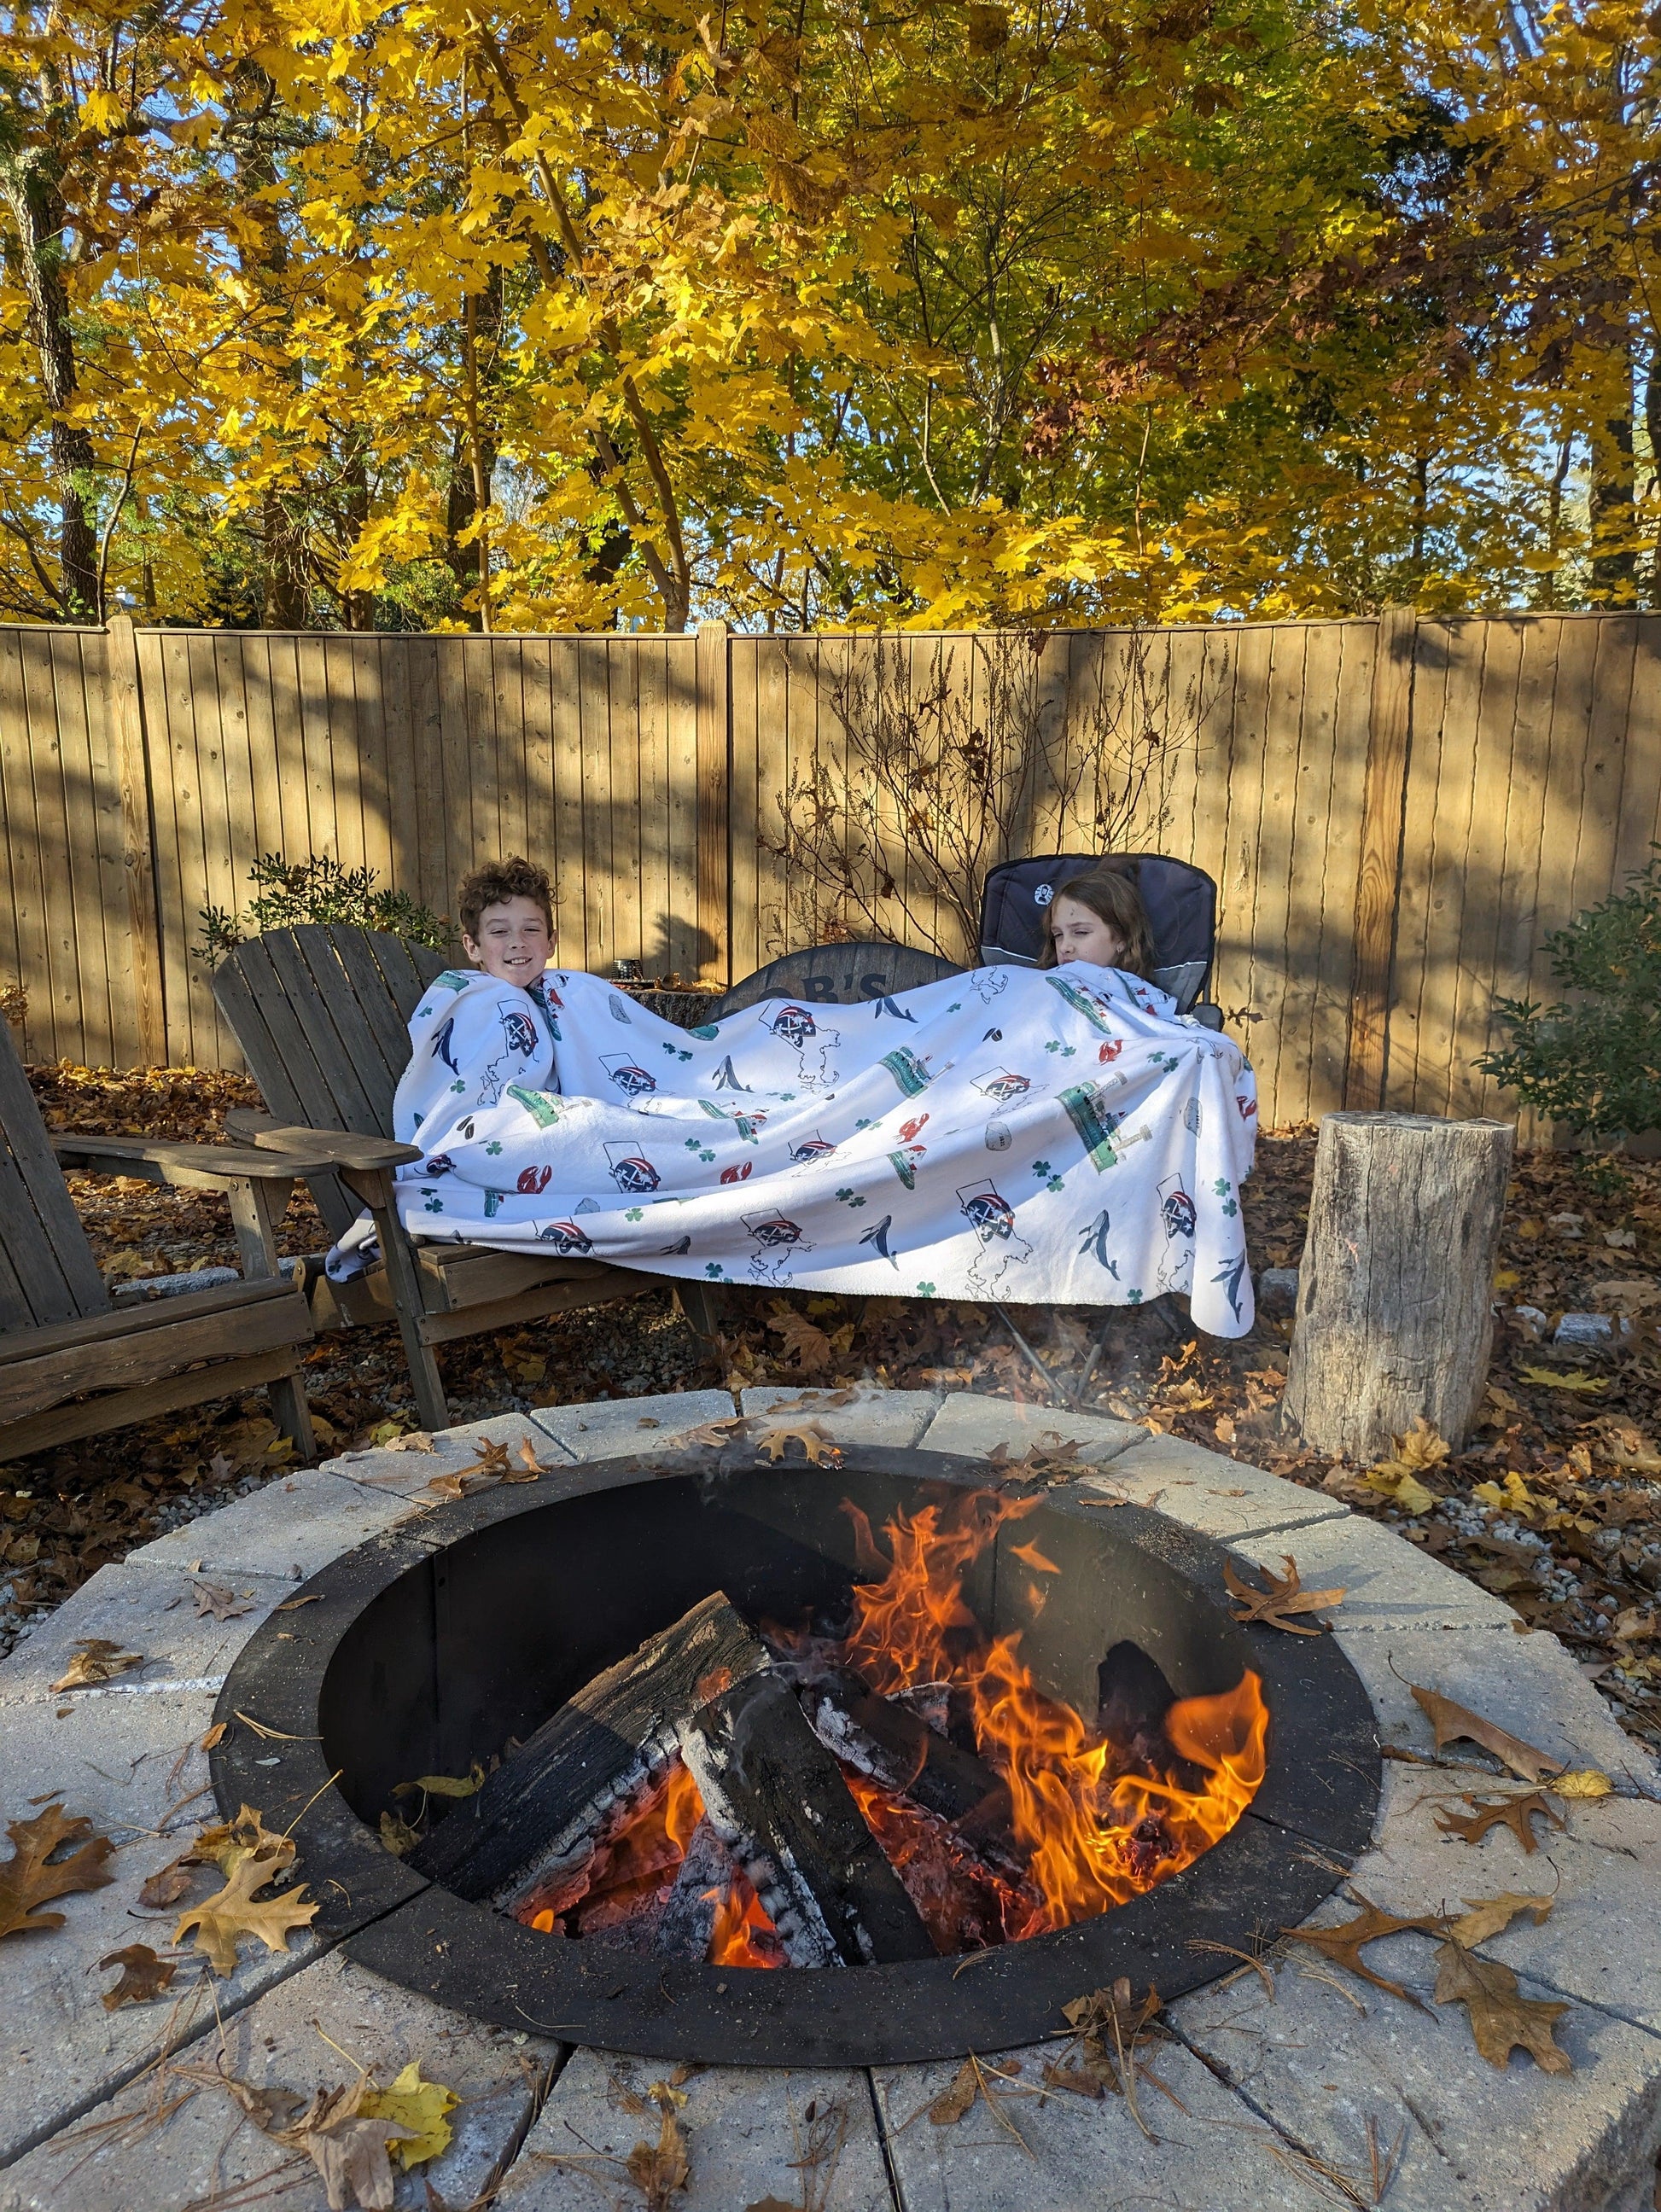 A boy and girl cozying up by a firepit in front of a fence on a cool Autumn day both sharing a large Massachusetts-themed plush blanket  bundle with featuring state icons and vibrant colors.